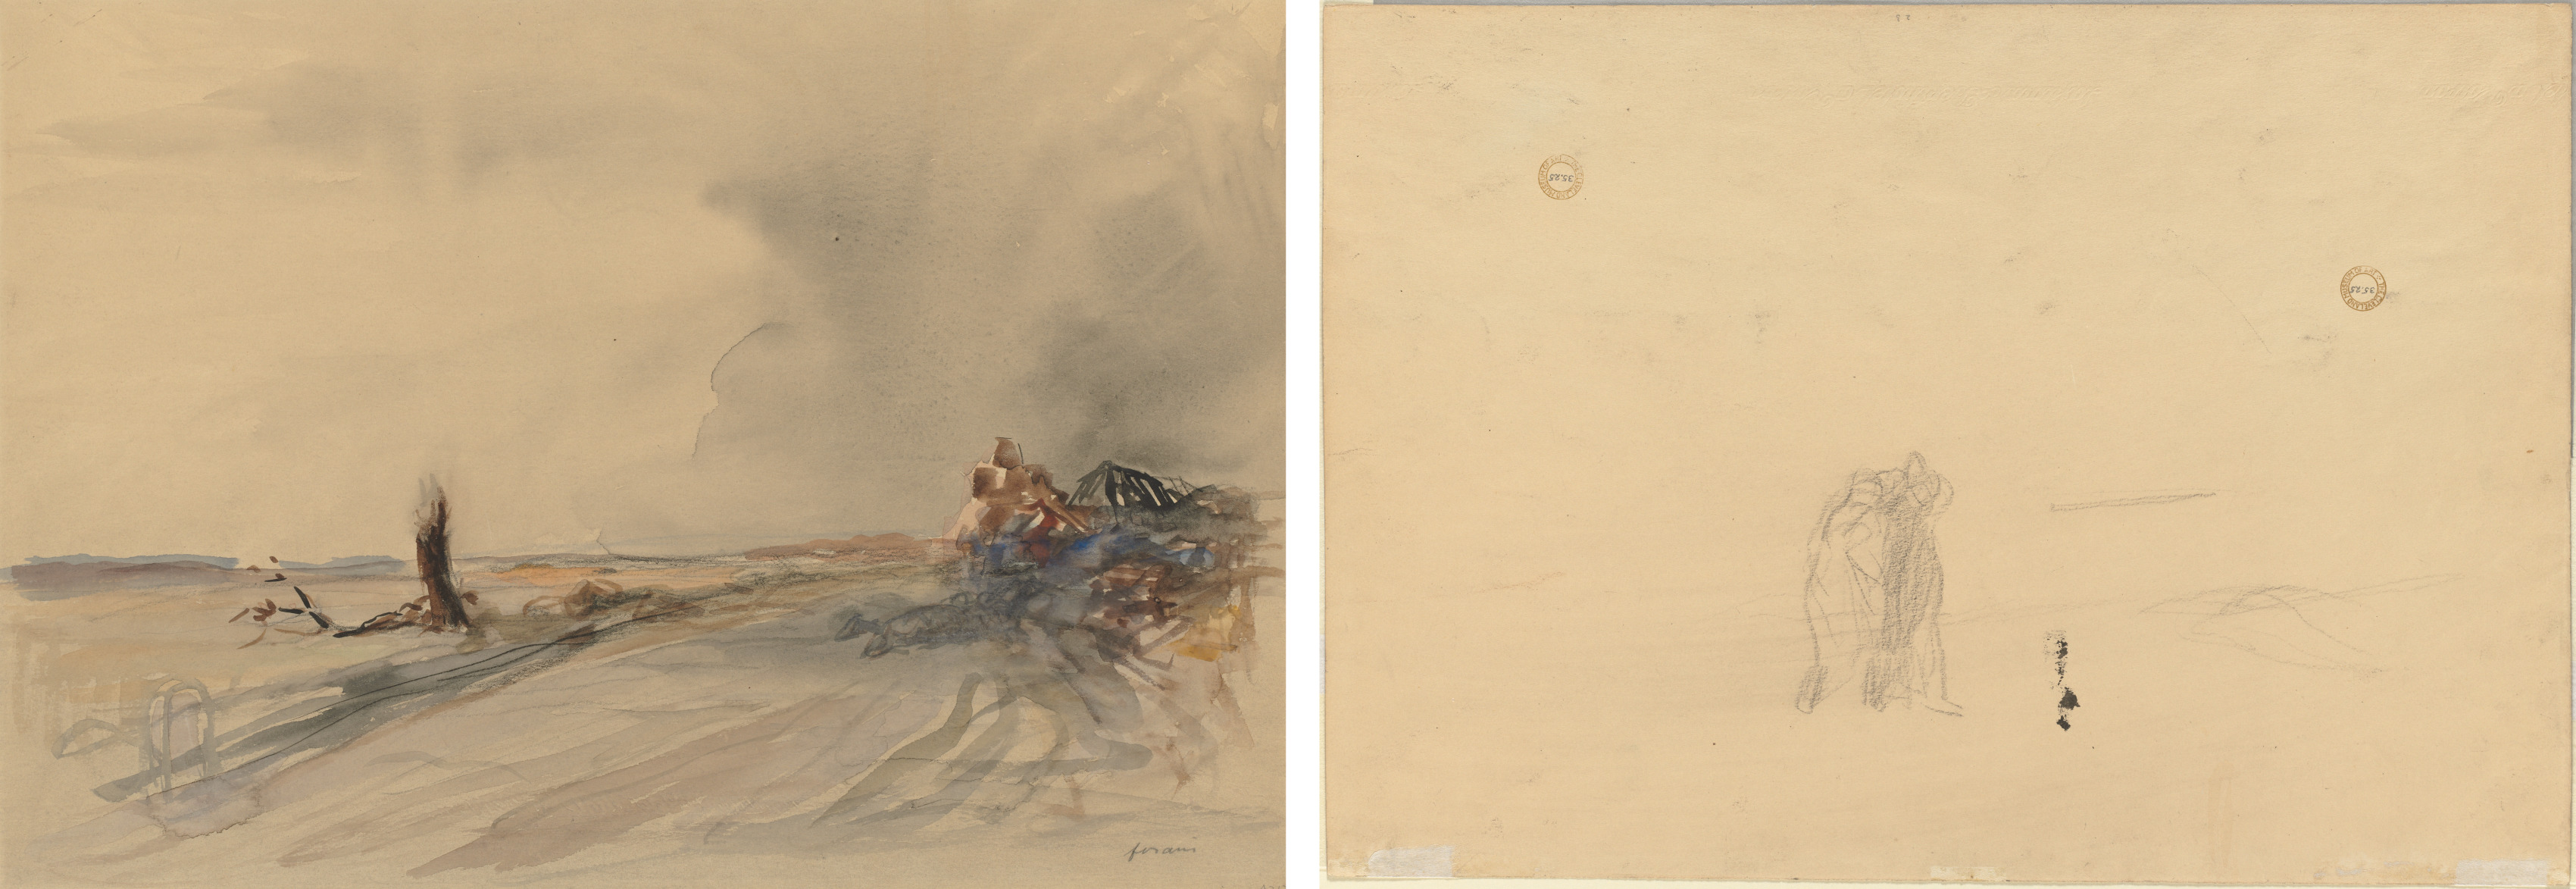 Devastated Land (recto); Figures in a Landscape (verso)